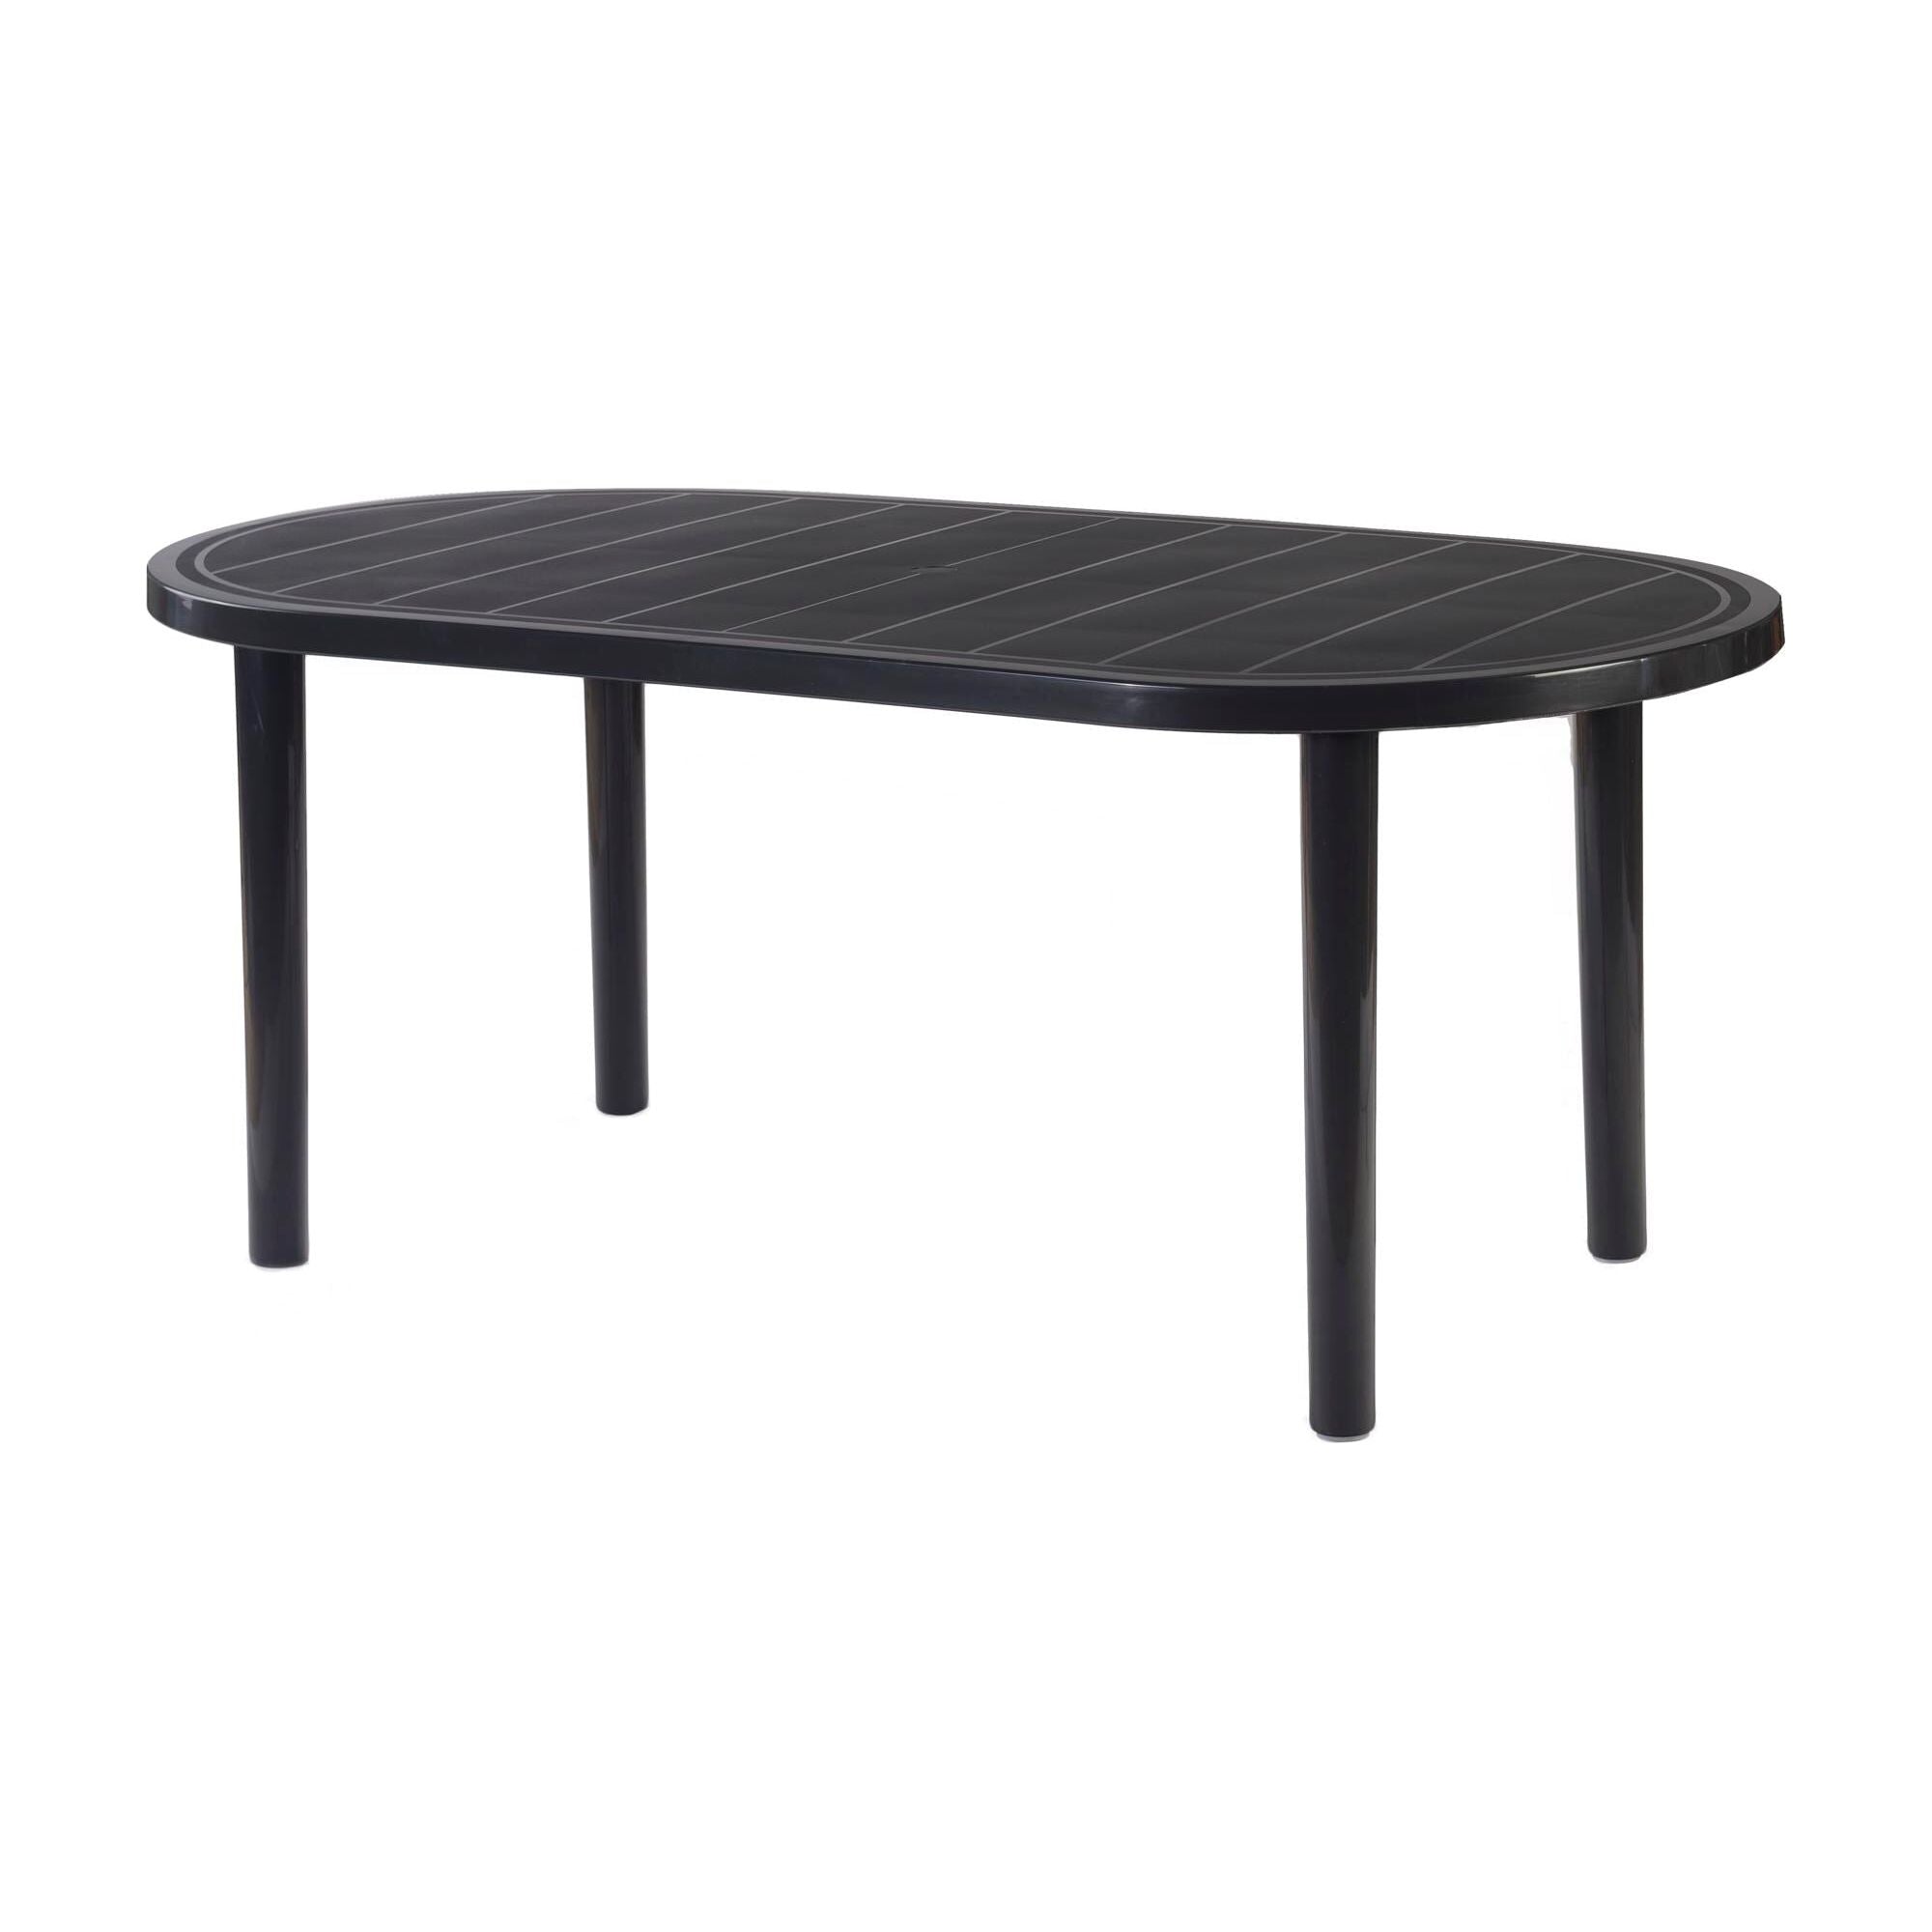 Garbar Brava Oval table Outdoor 180x90 Anthracite